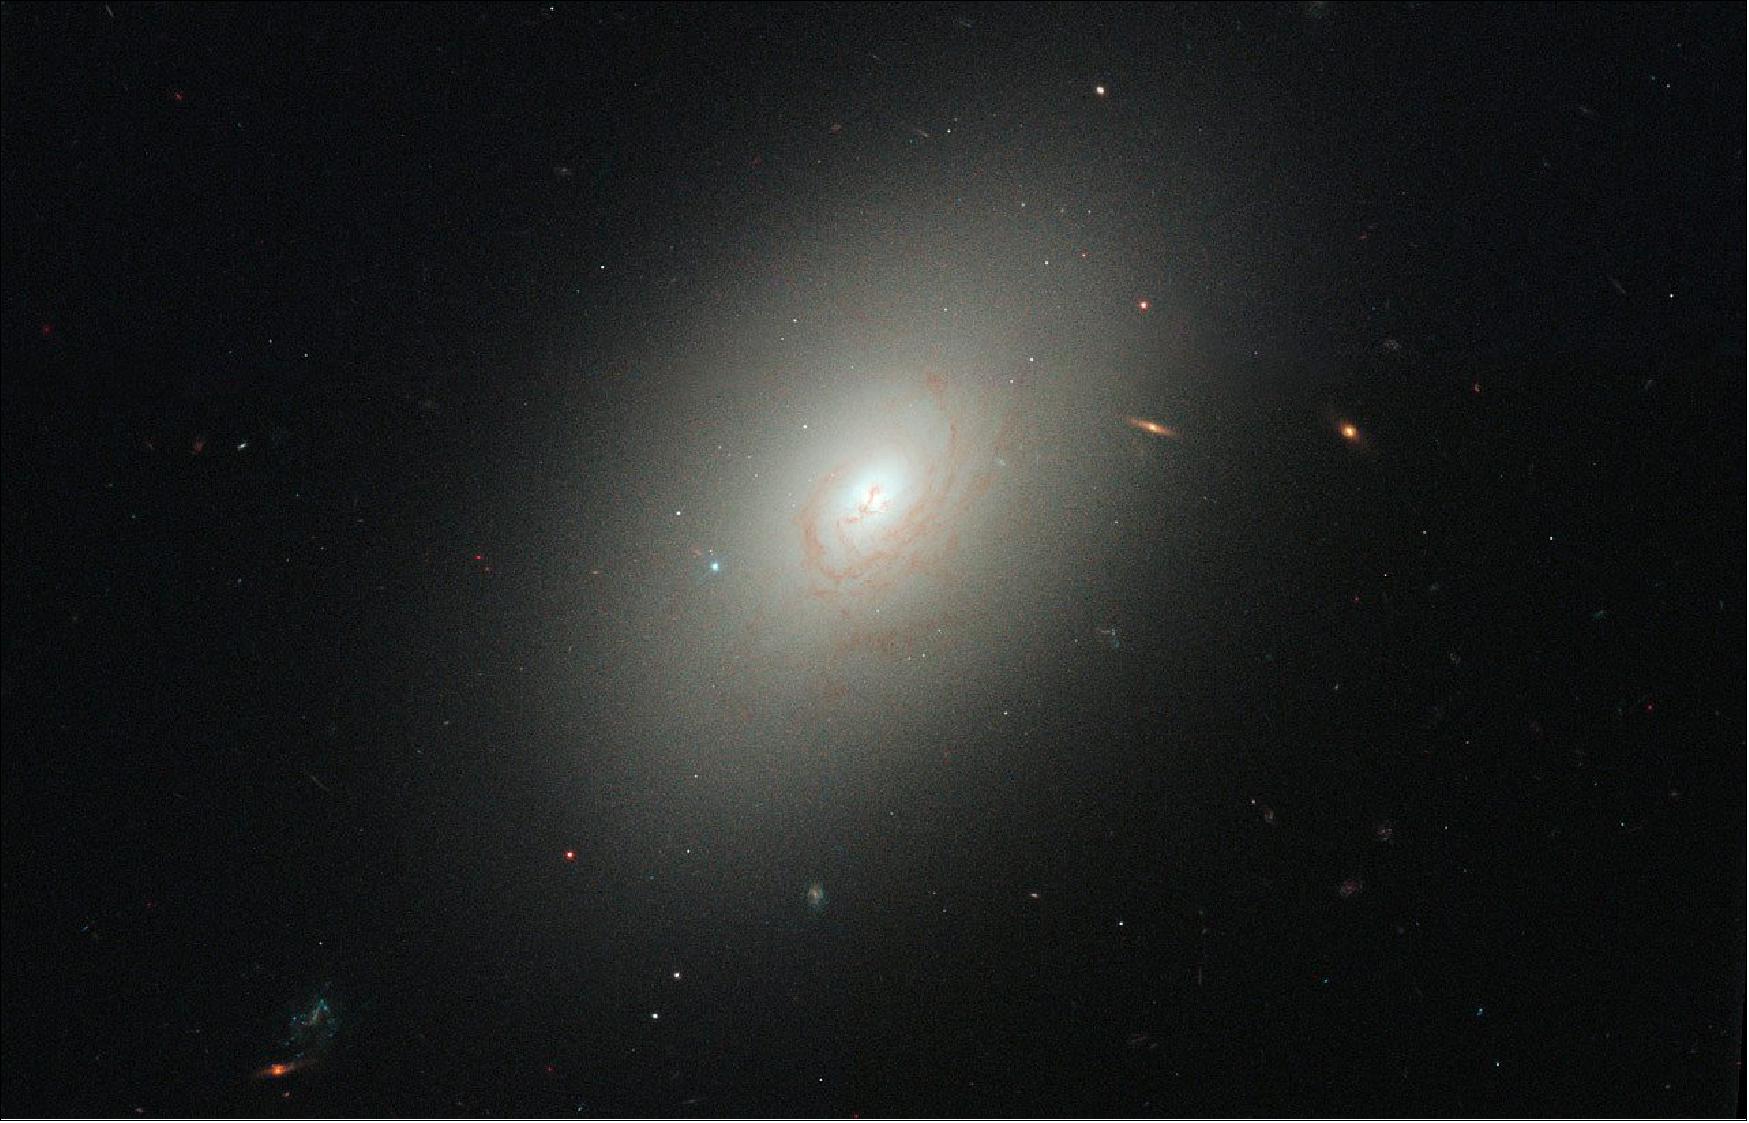 Figure 28: An image of the quiescent elliptical galaxy NGC 4150, made with the Hubble Space Telescope. Star formation in this system has essentially shut down [image credit: NASA, ESA, R. M. Crockett (University of Oxford), S. Kaviraj (Imperial College London & University of Oxford), J. Silk (University of Oxford), M. Mutchler (STScI, Baltimore), R. O'Connell (University of Virginia, Charlottesville), WFC3 SOC, Licence type Attribution (CC BY 4.0)]